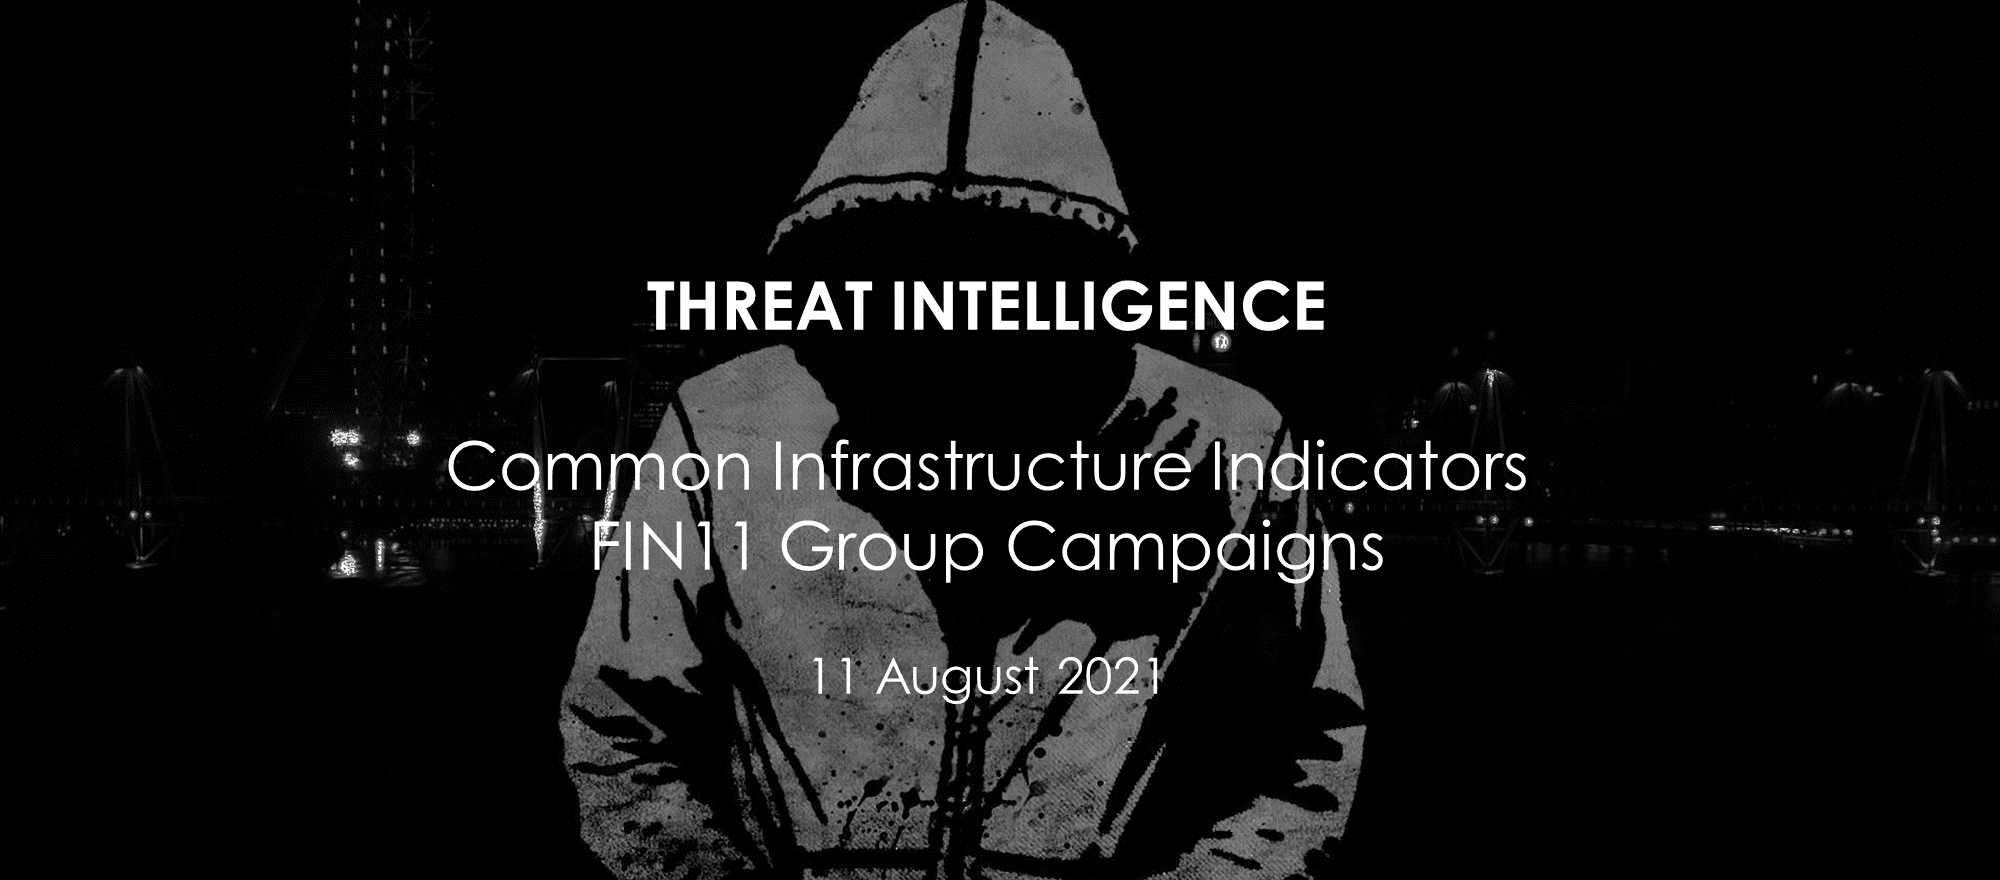 THREAT INTELLIGENCE Common Infrastructure Indicators – FIN11 Group Campaigns